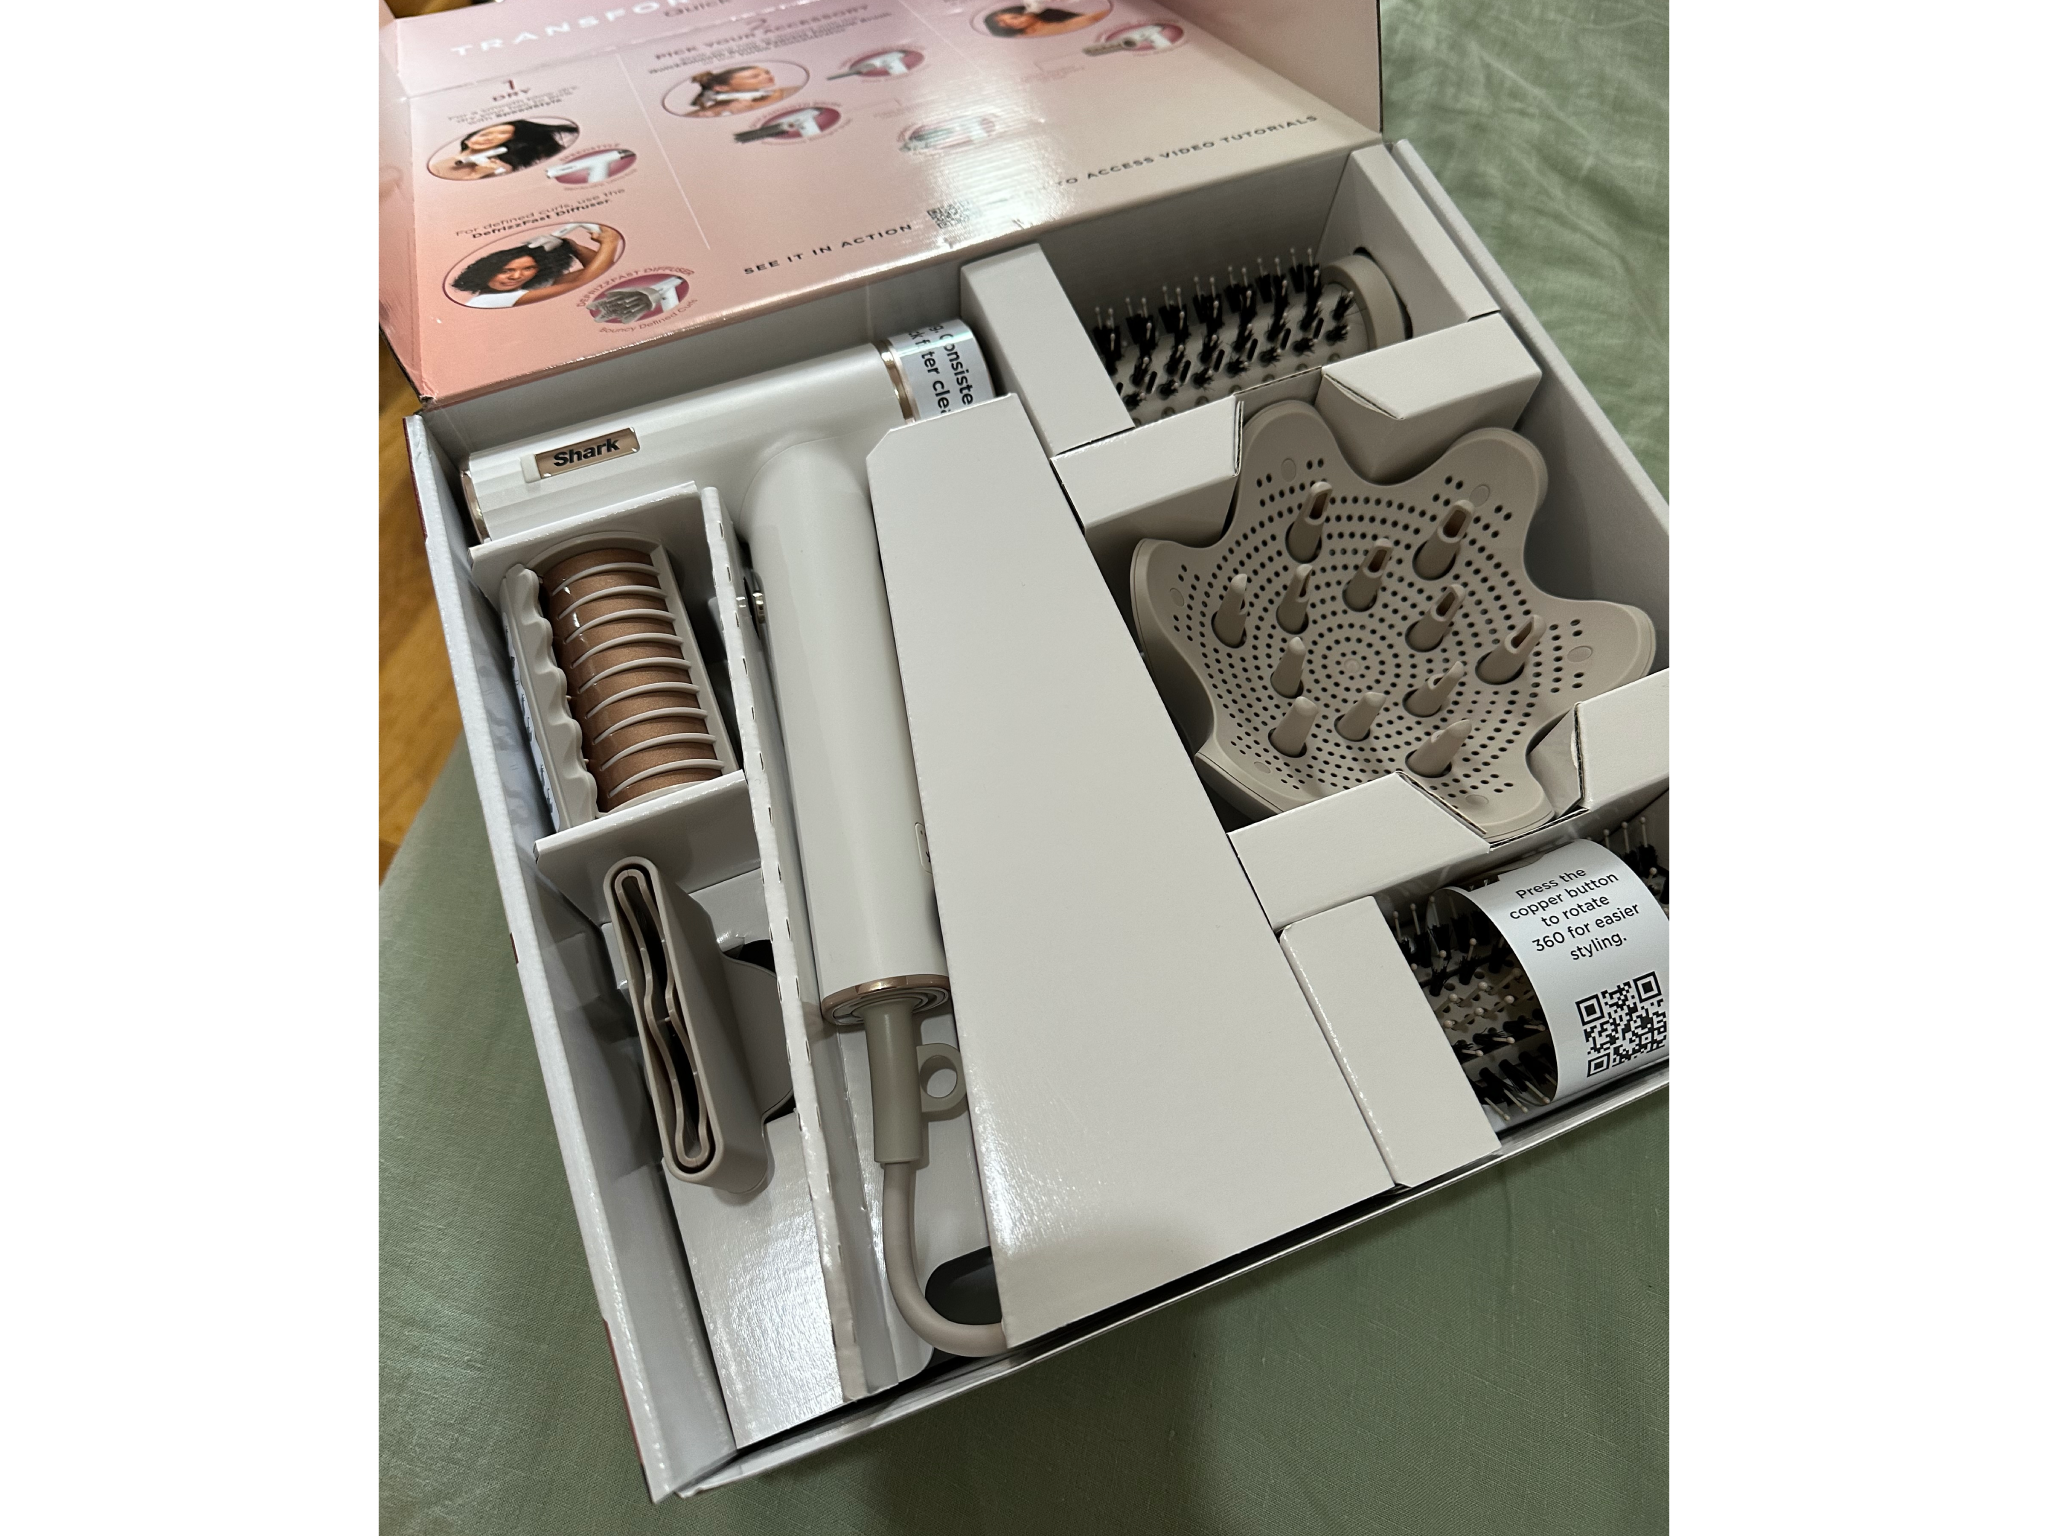 Inside the Shark speedstyle five-in-one hair dryer box